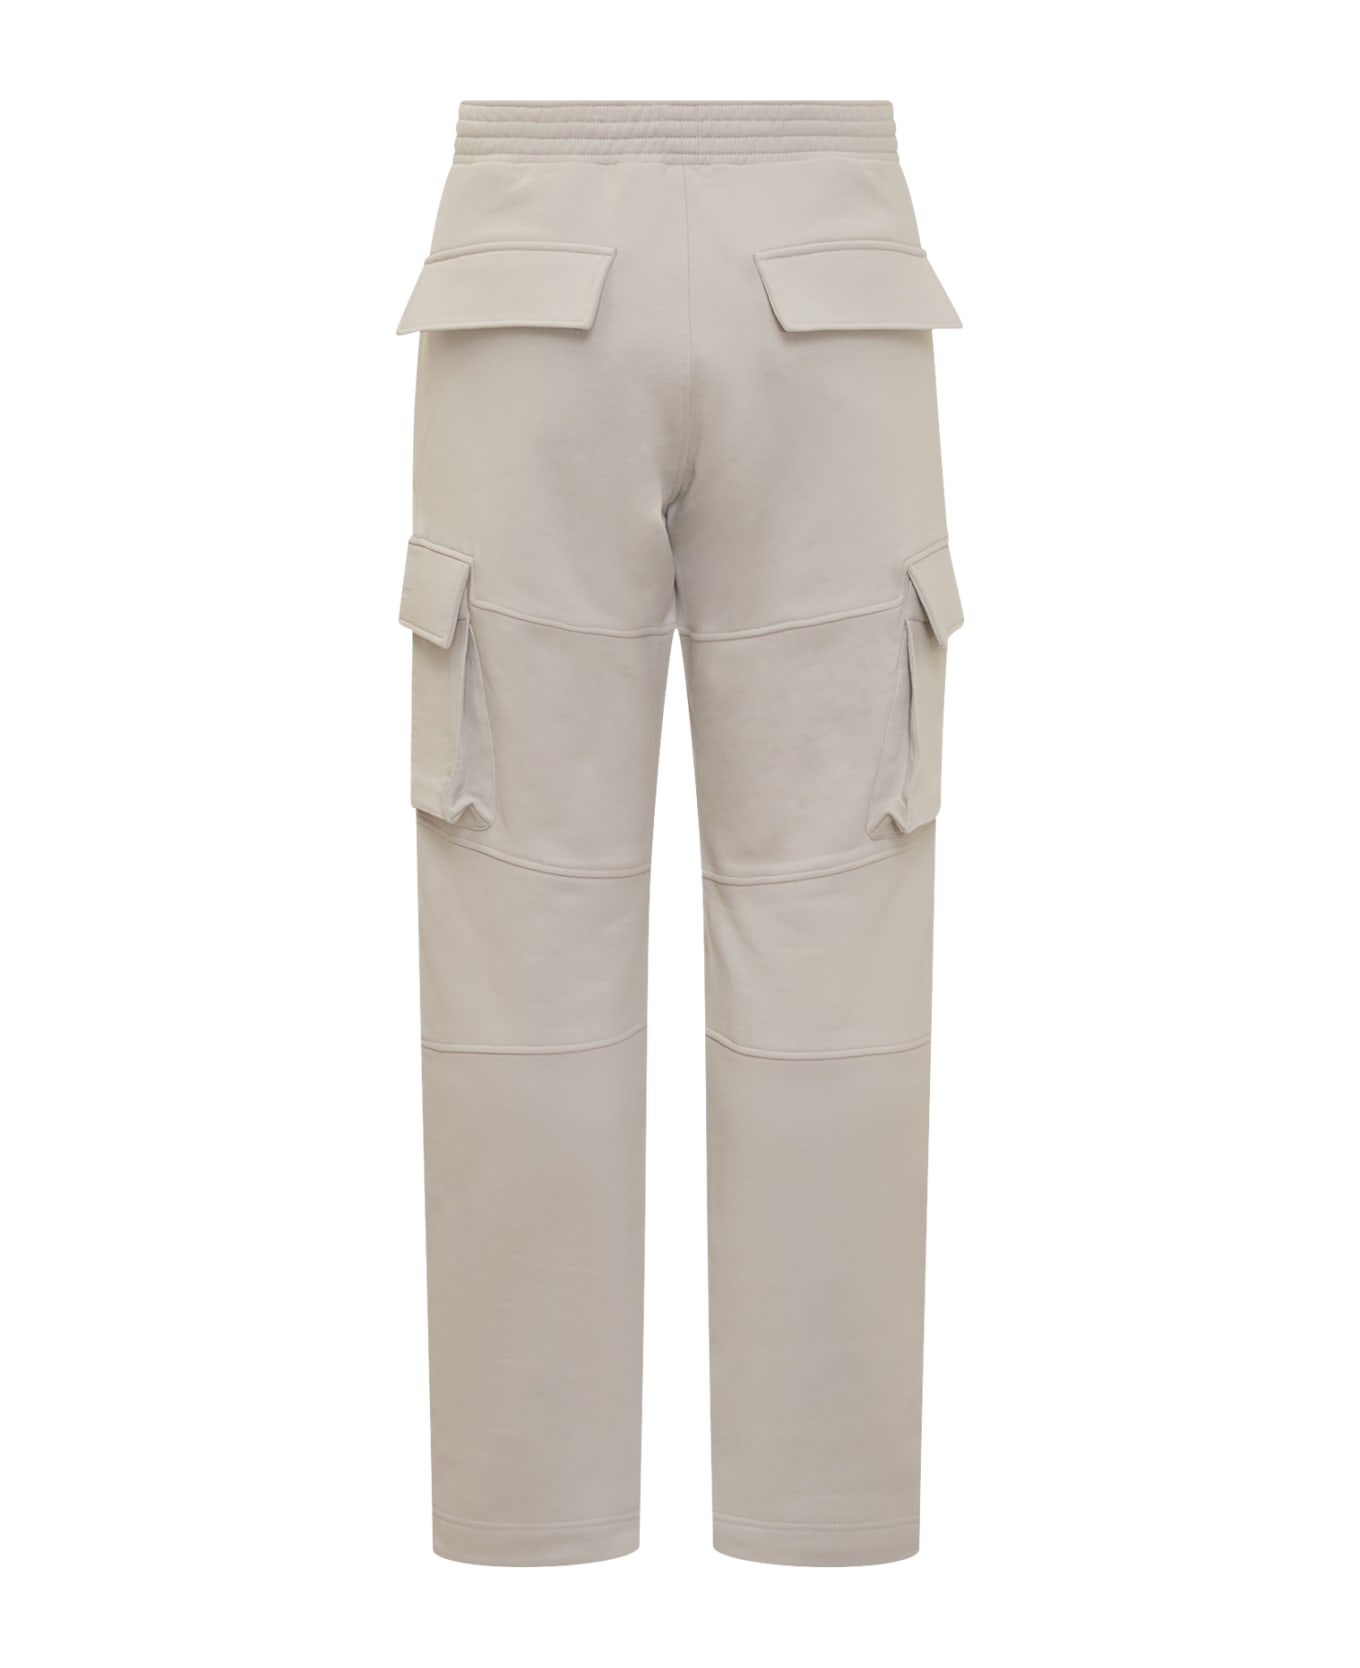 Givenchy Cotton Cargo Pants - CHALK ボトムス